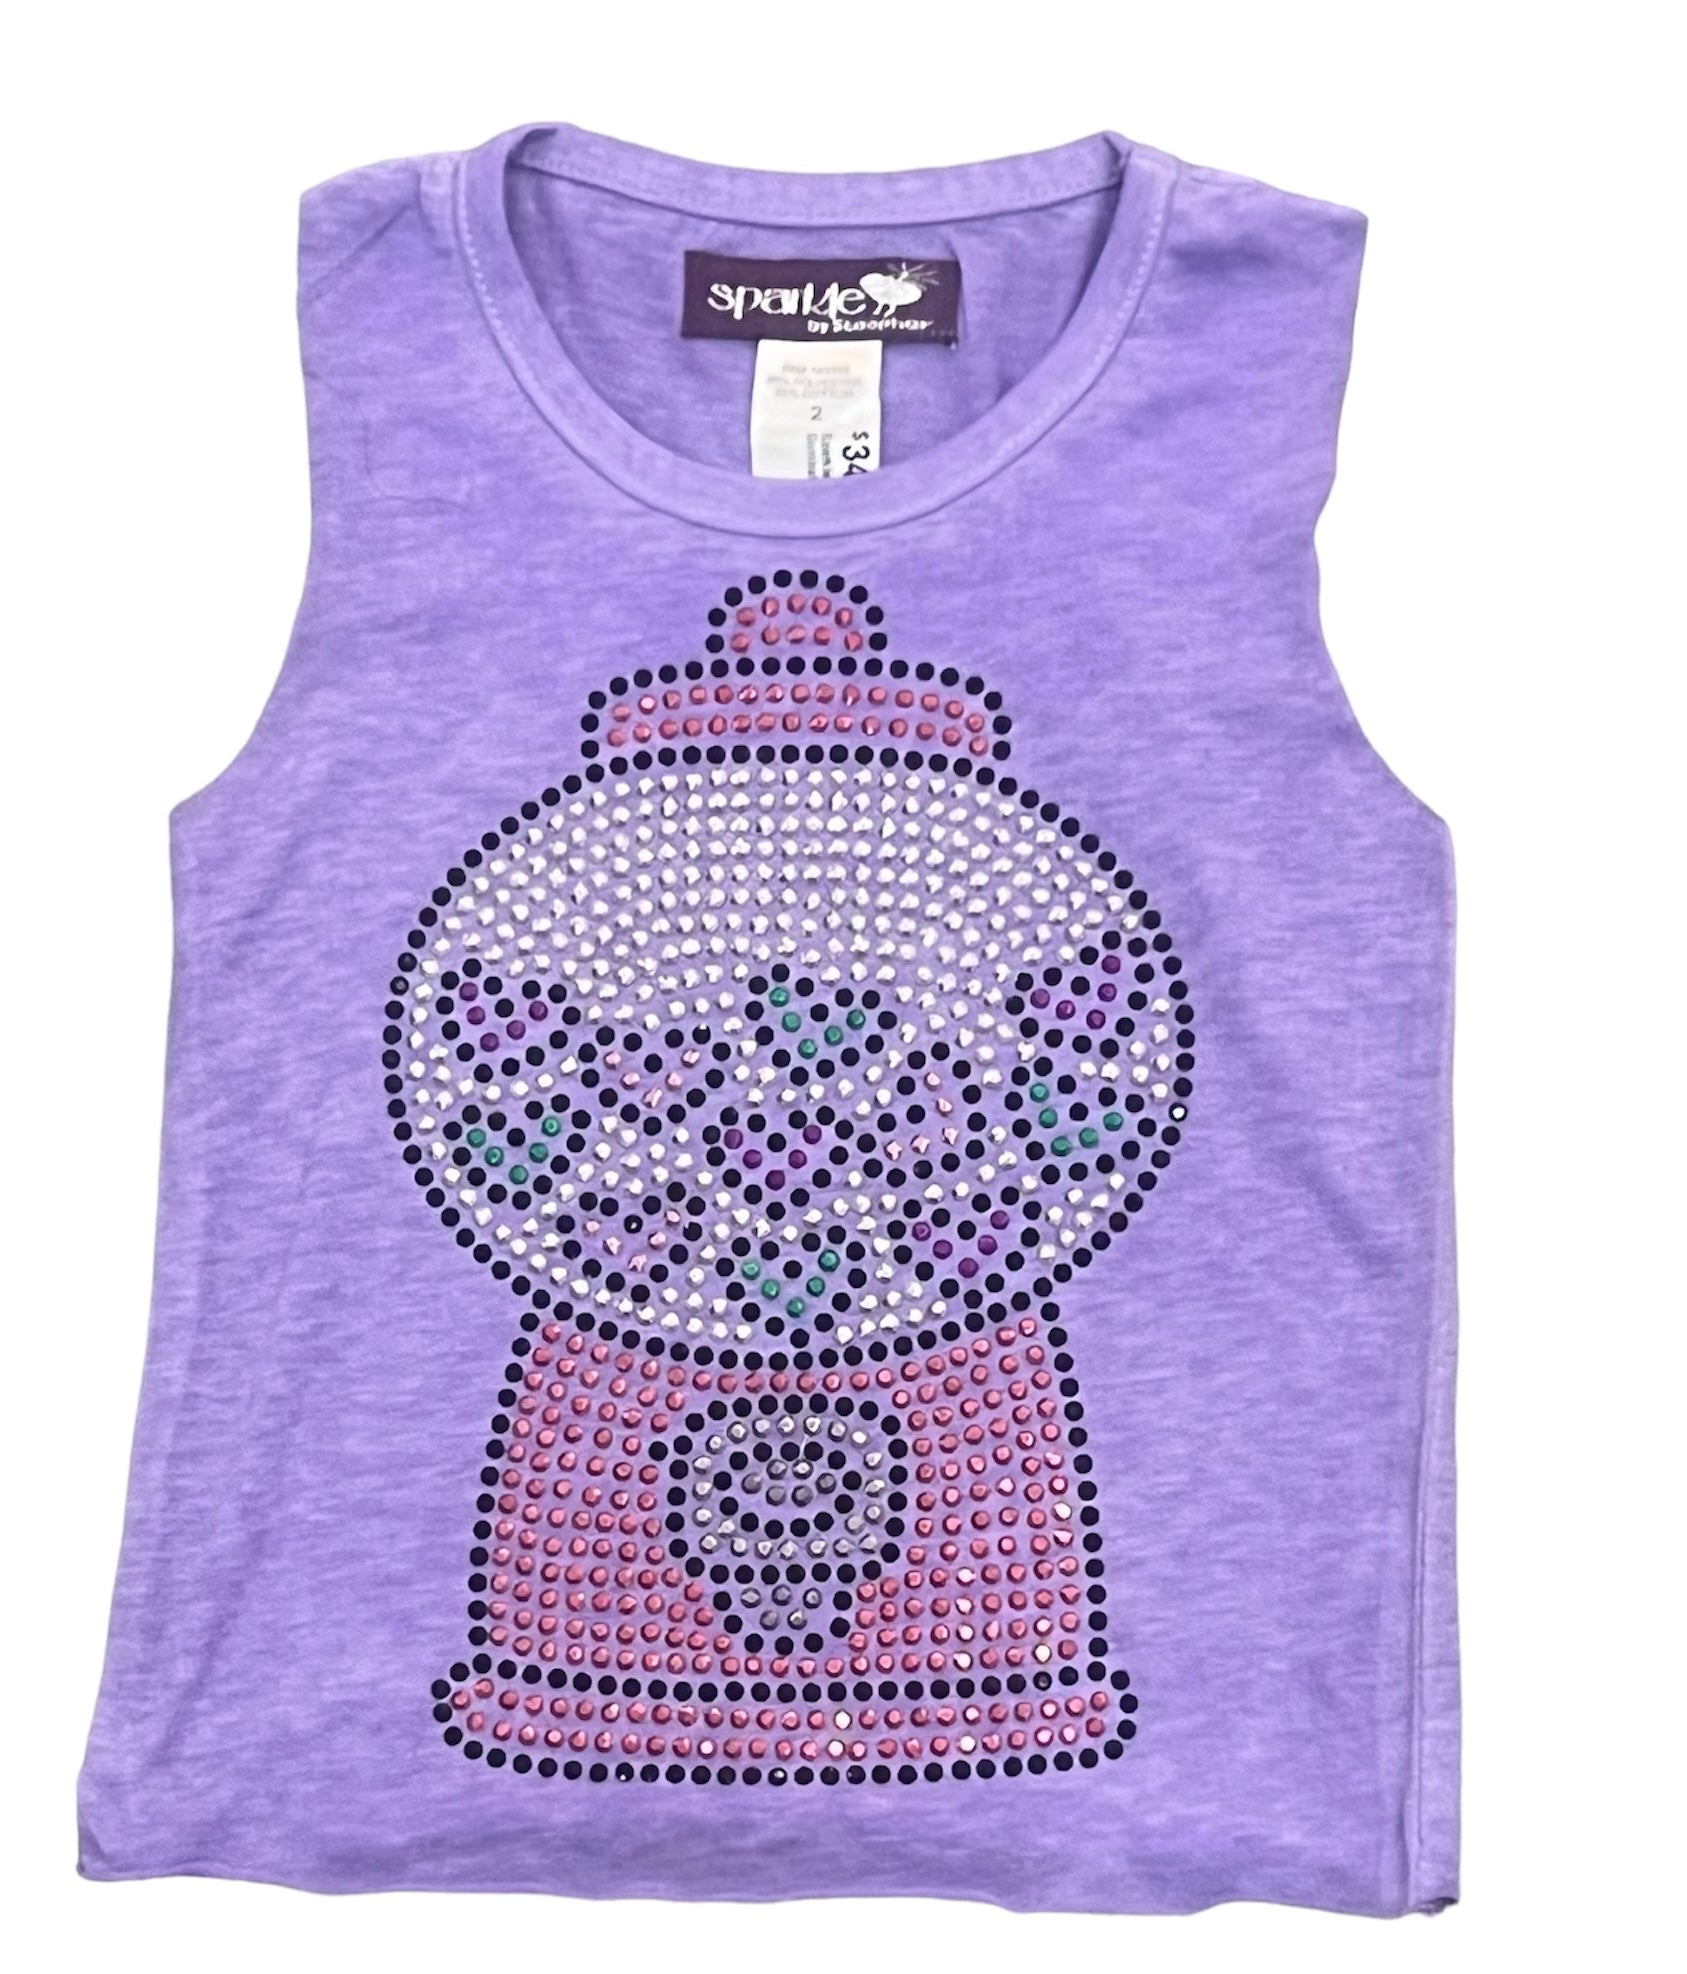 Sparkle by Stoopher - Lavender Gumball Tank